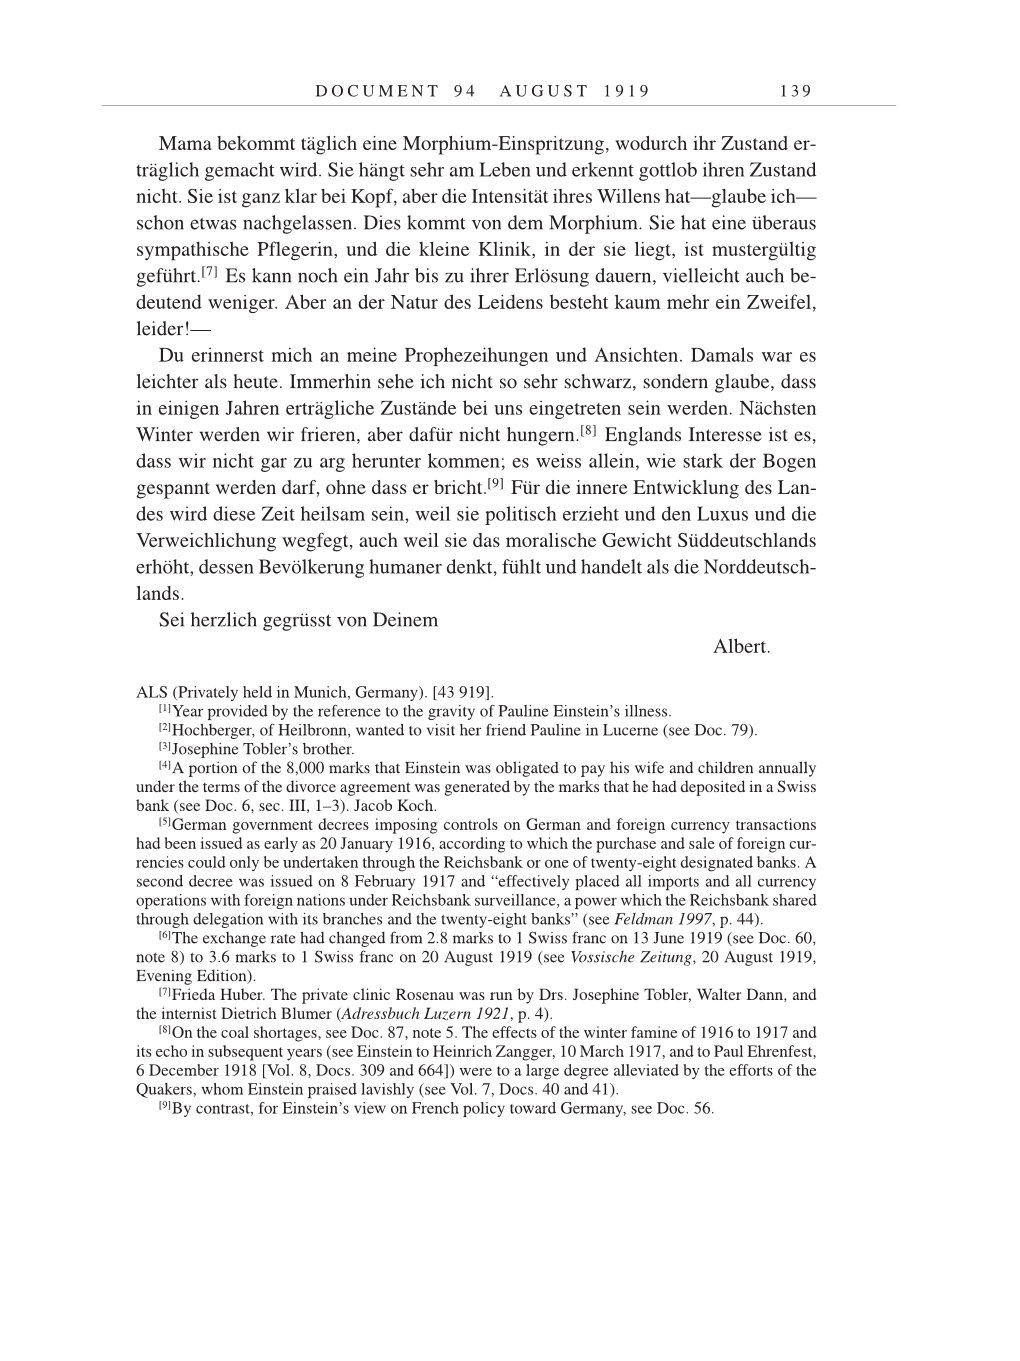 Volume 9: The Berlin Years: Correspondence January 1919-April 1920 page 139